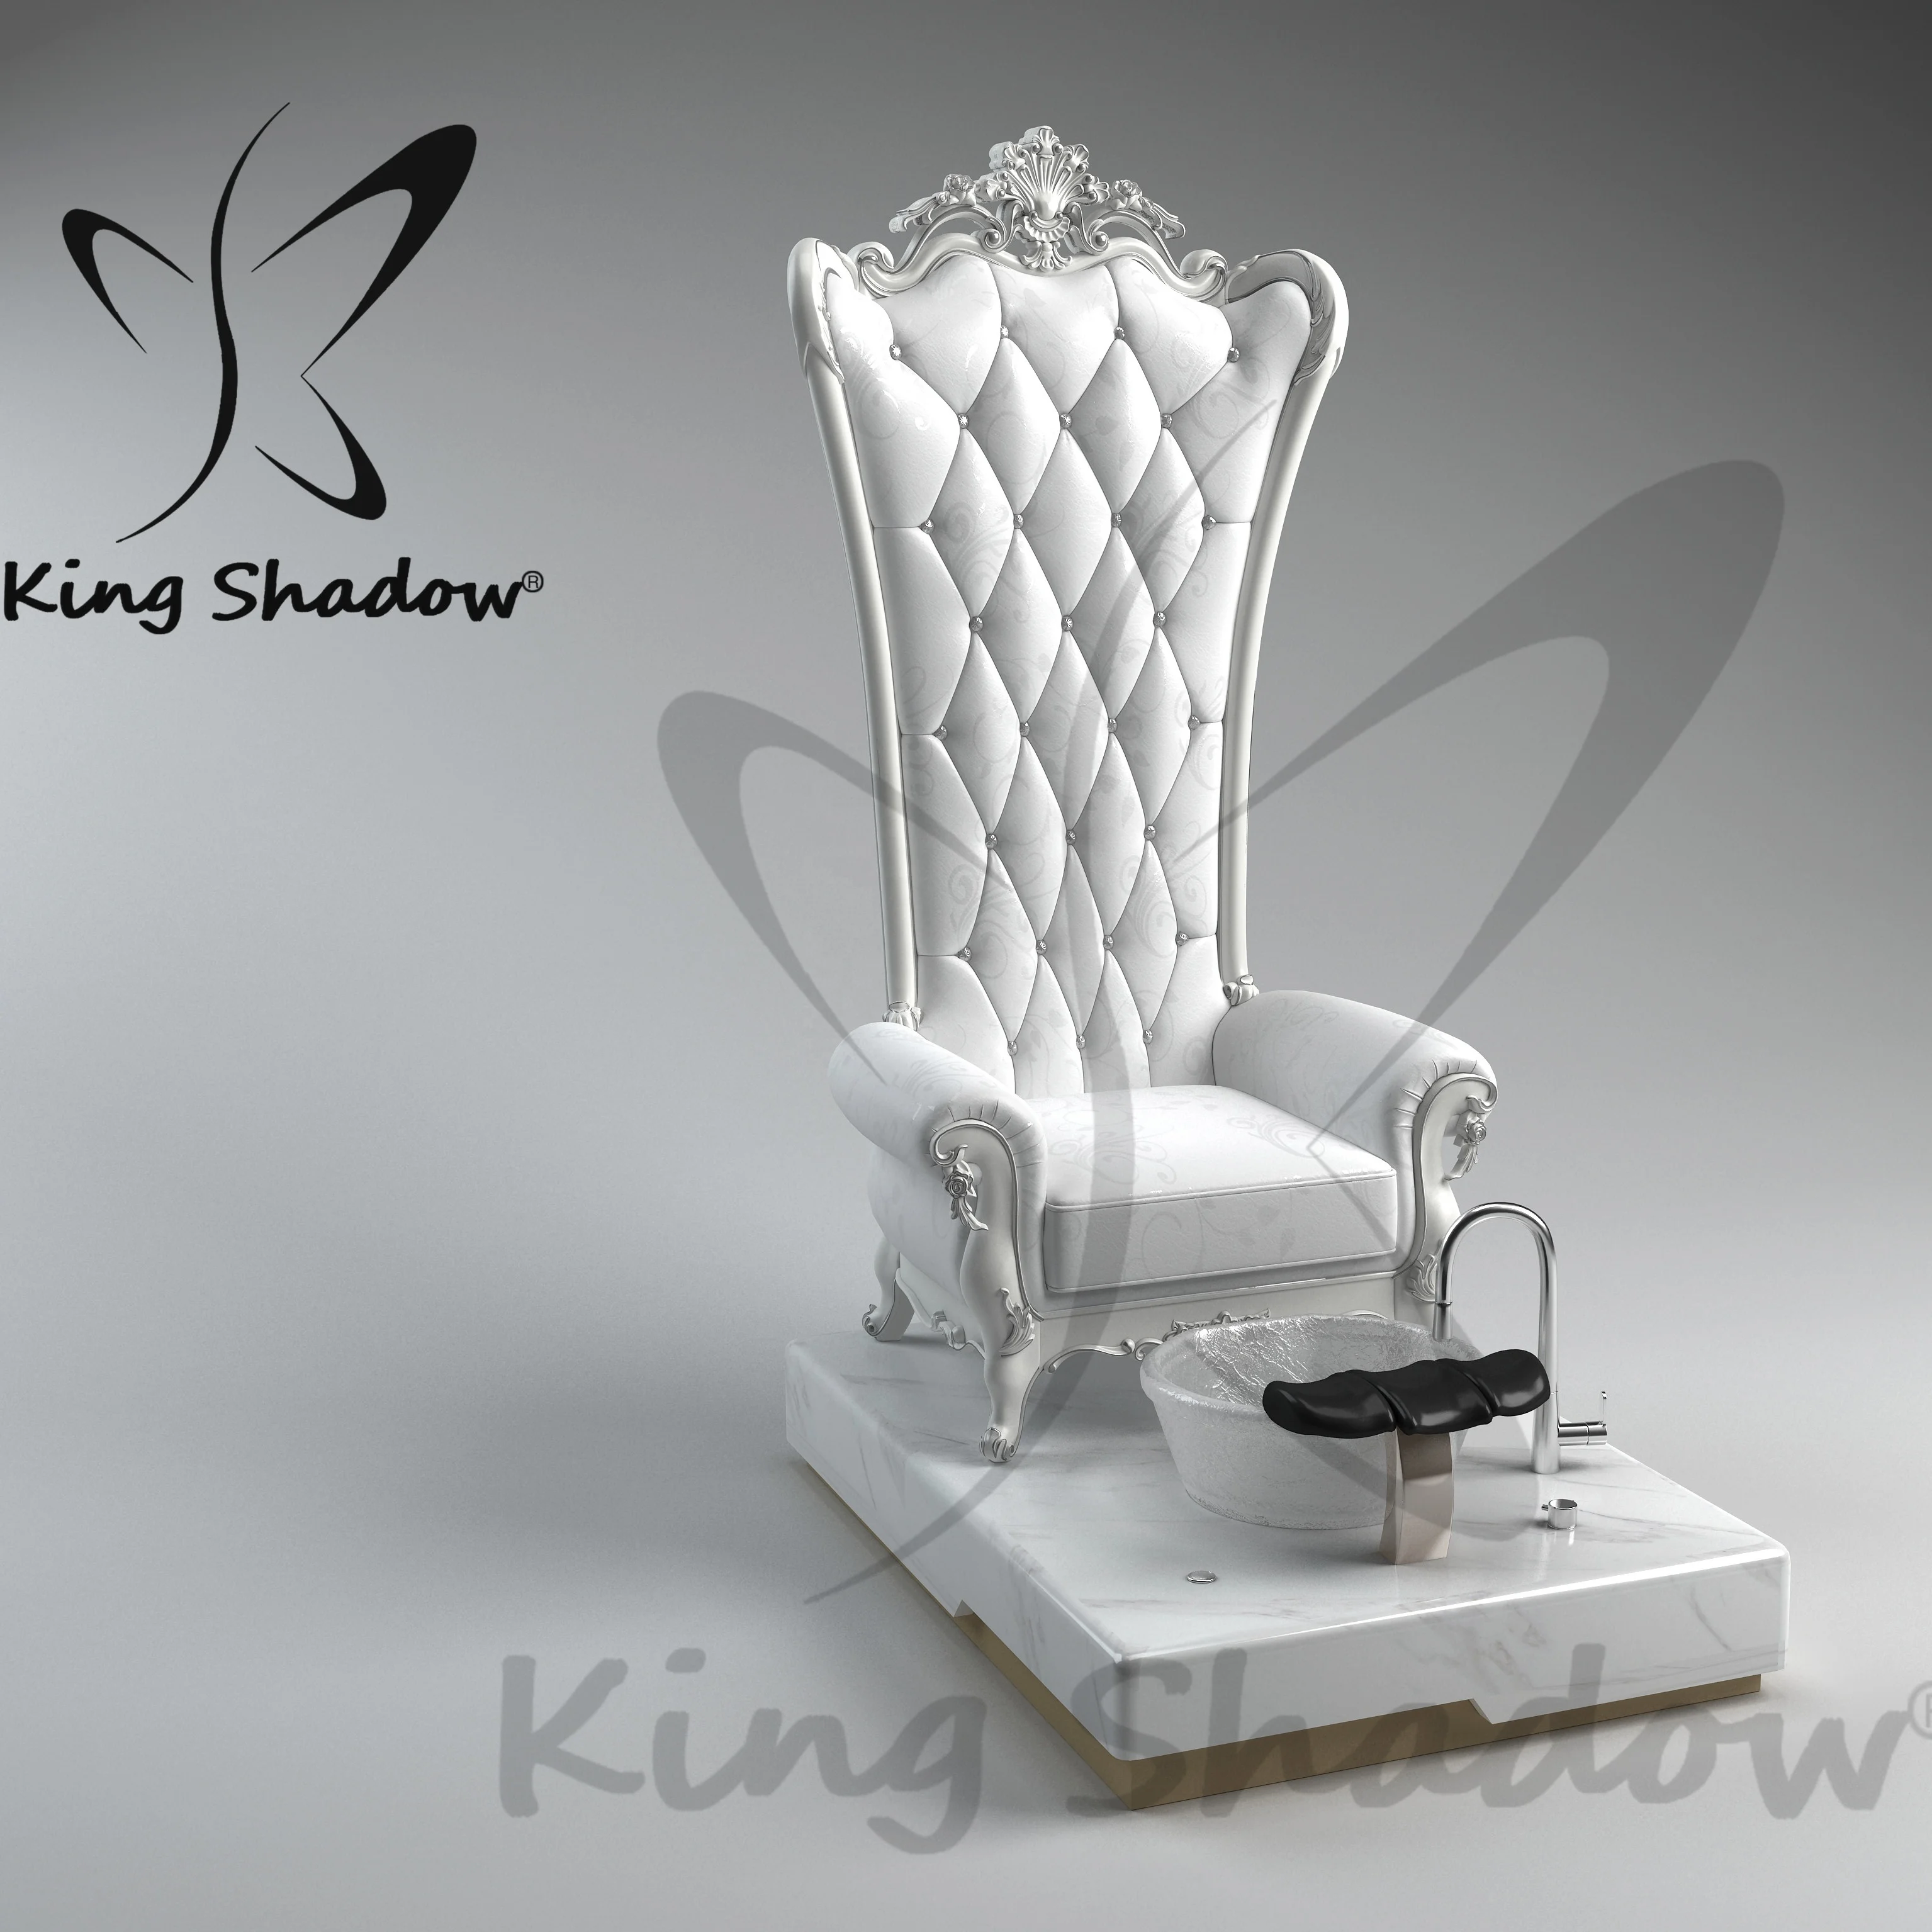 

Kingshadow beauty salon spa pedicure chair cheap pedicure thrown chairs suppliers for sale spa equipment and furniture, Can be choose